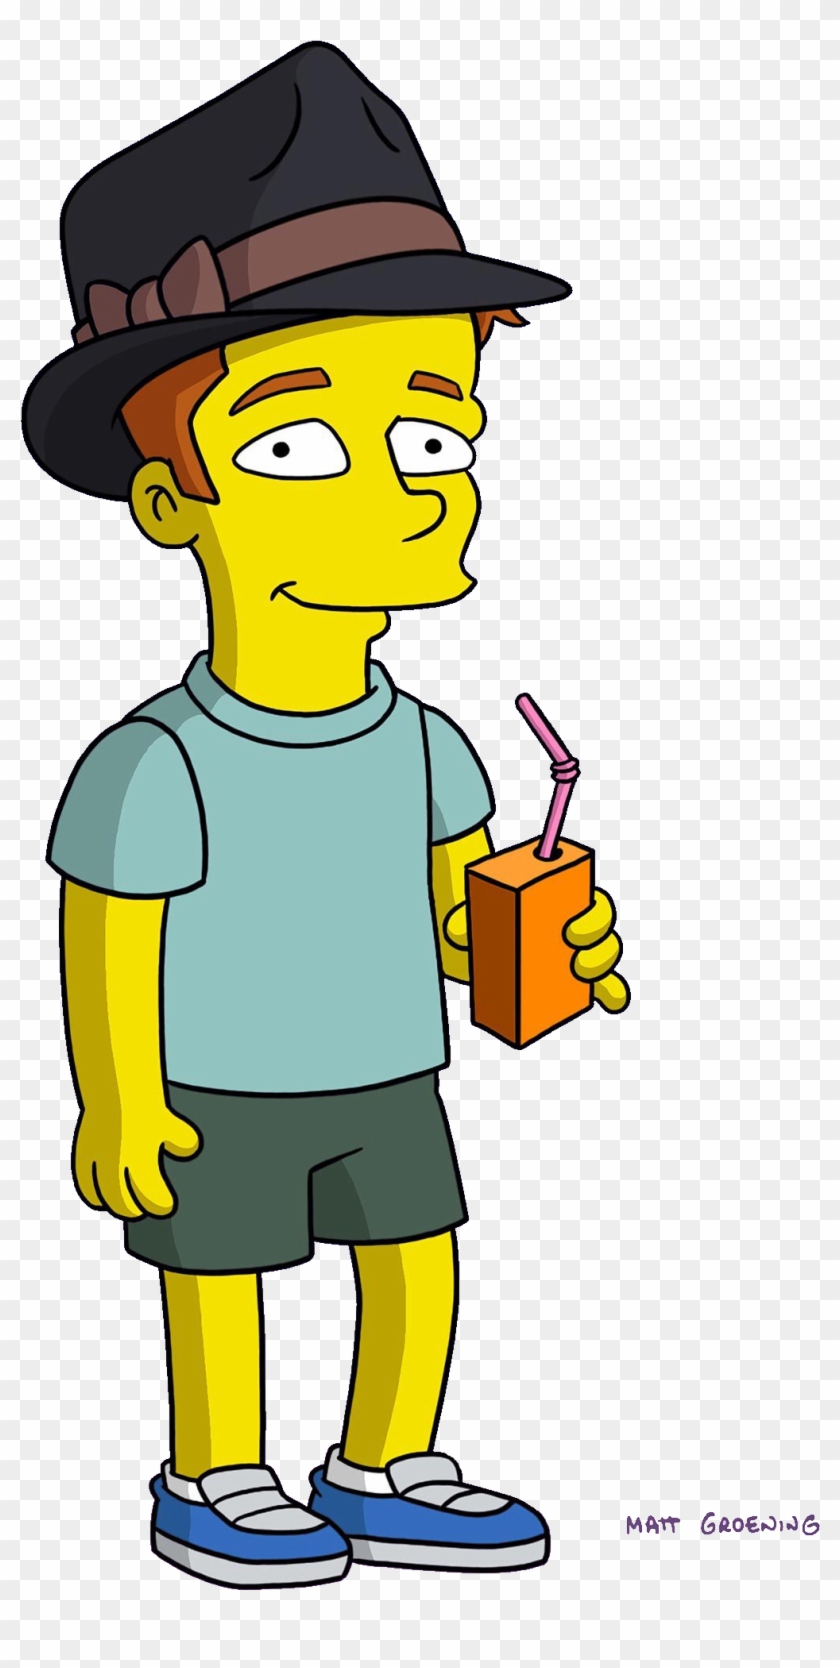 Brendan - Haw Haw Land The Simpsons Clipart #2449338